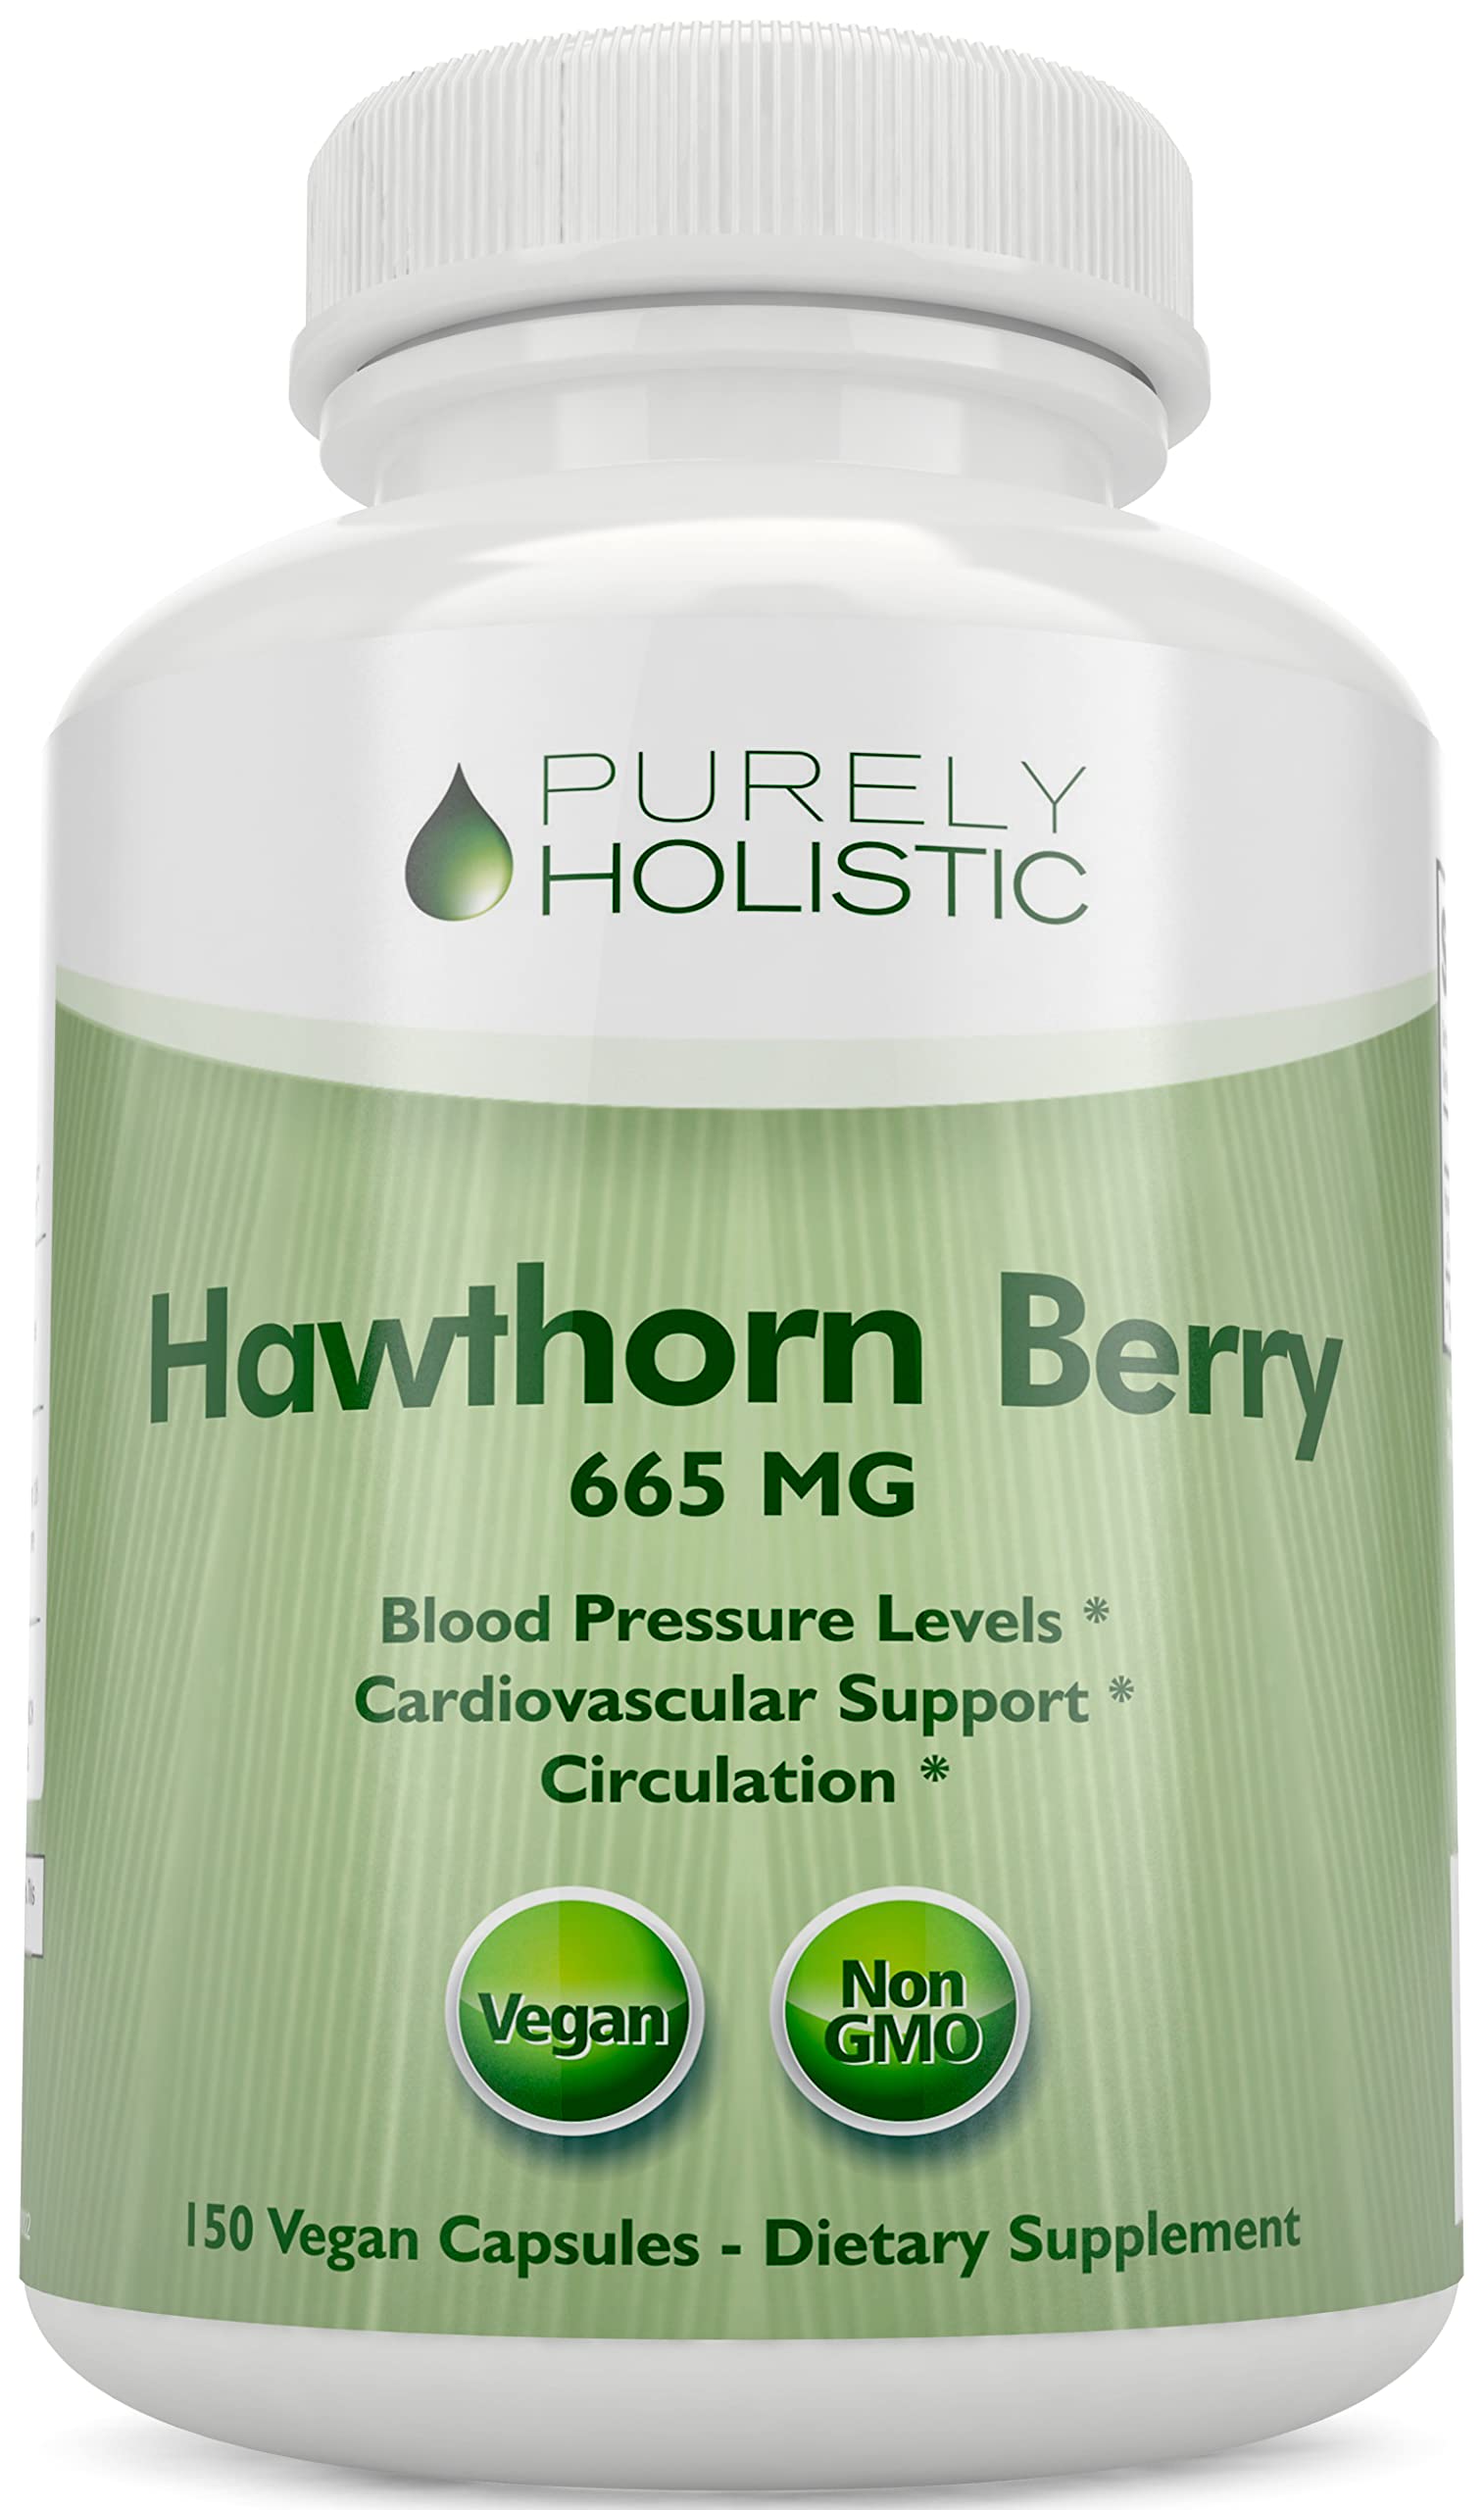 Purely Holistic Hawthorn Berry Capsules 150 Capsules for 5 Month Supply - High Strength 4:1 Hawthorn Extract - Non GMO - Vegan Hawthorne Supplement - Supports Cardiovascular & Digestive Health